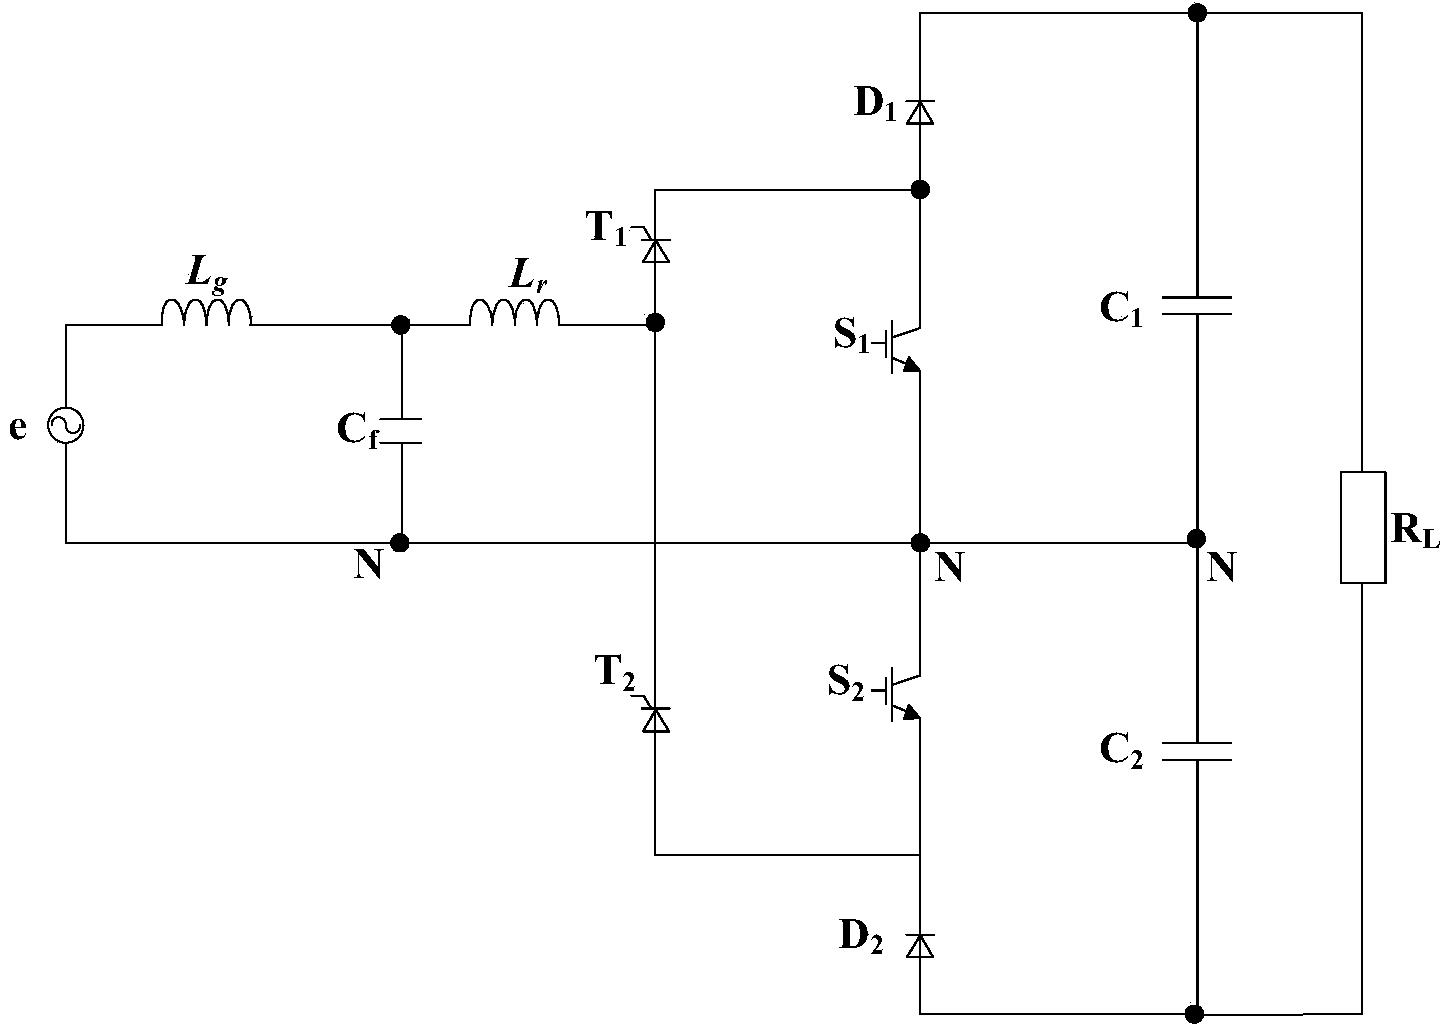 LCL filtering-based circuit topology structure of high-power PWM (pulse-width modulation) rectifier